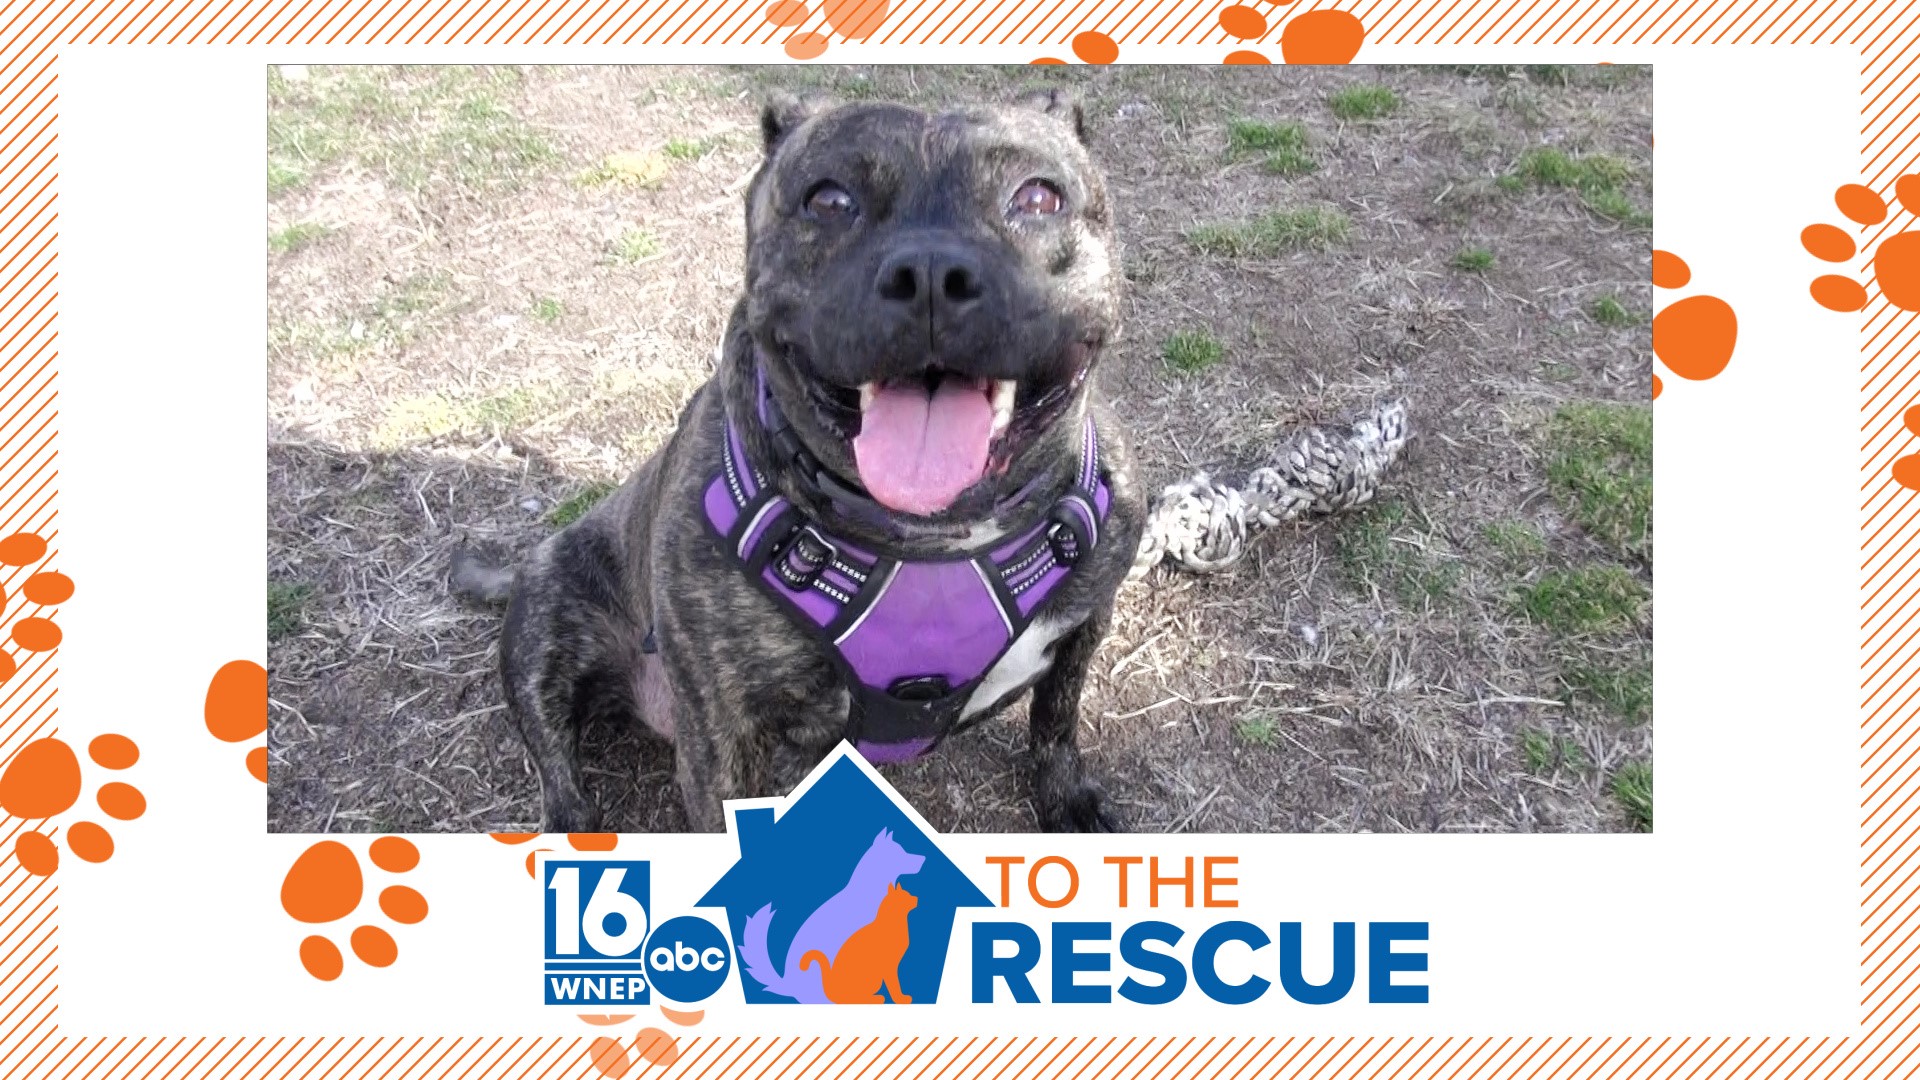 In this week's 16 To The Recue we meet a 5-year-old pit bull/mix who rescue workers believe is only getting overlooked because of her breed.